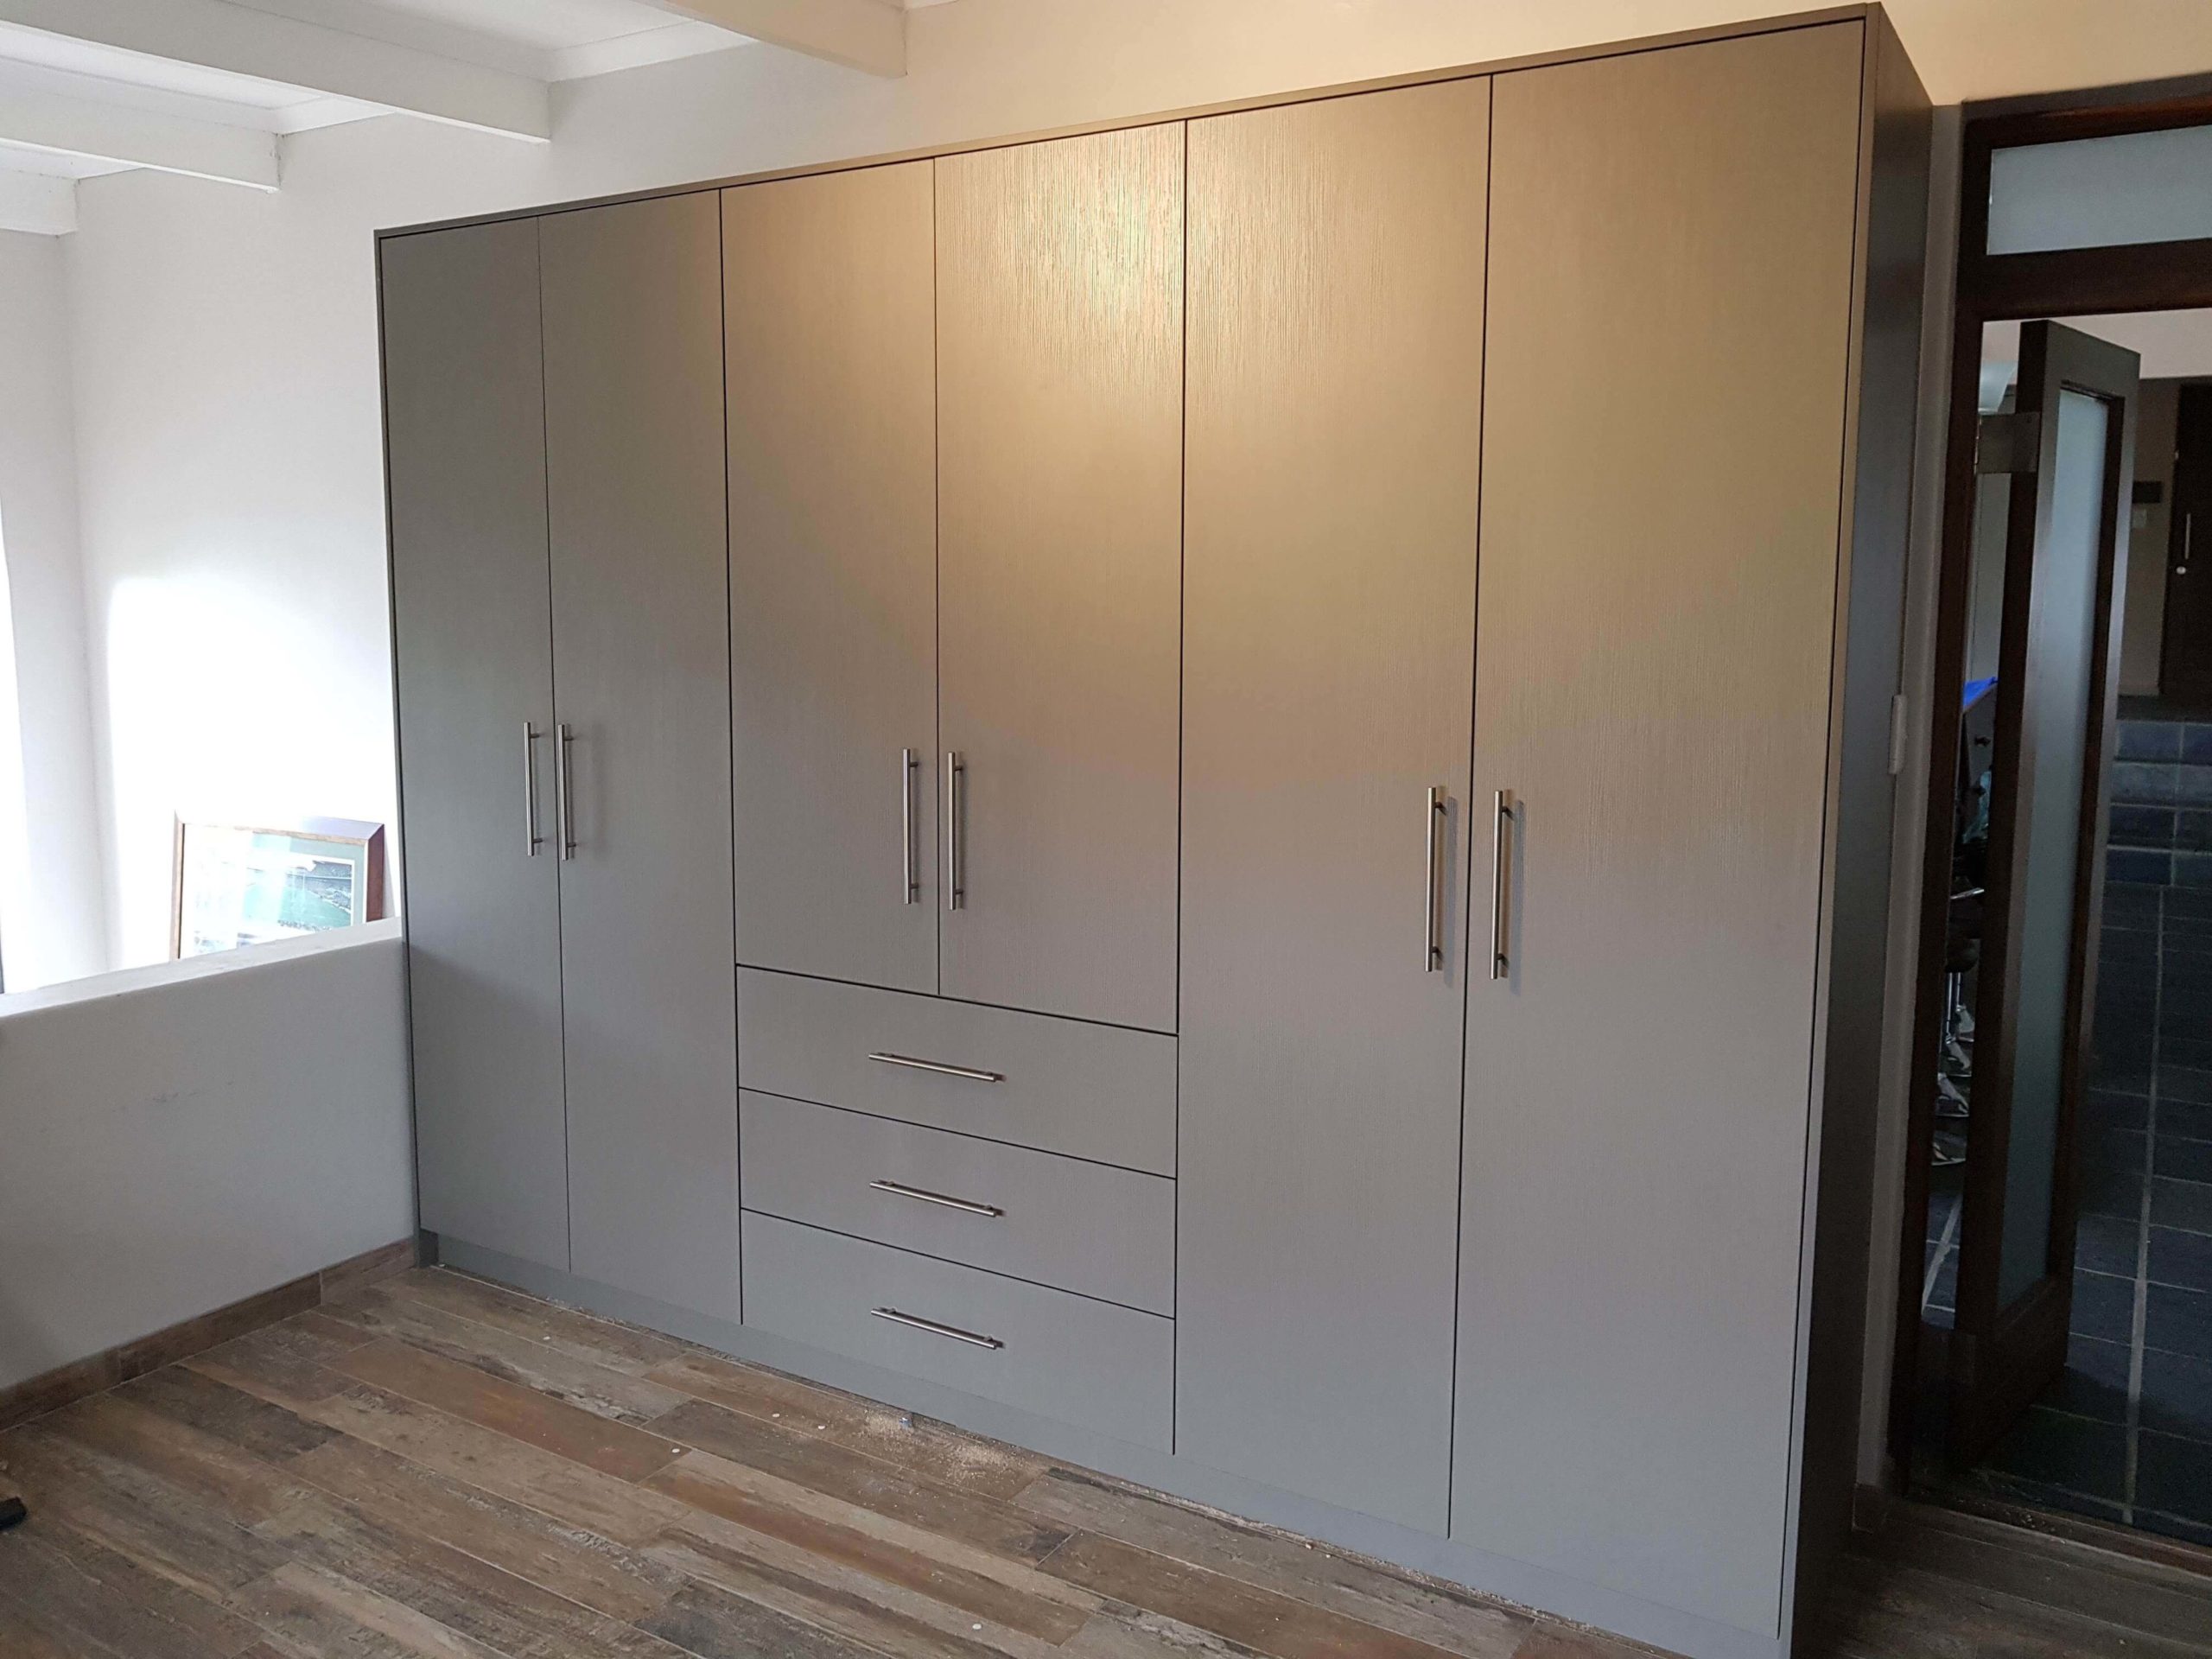 Bespoke Designs - 20180816 141513 scaled - kitchen renovation,cabinetry,custom cabinetry,built in cupboard